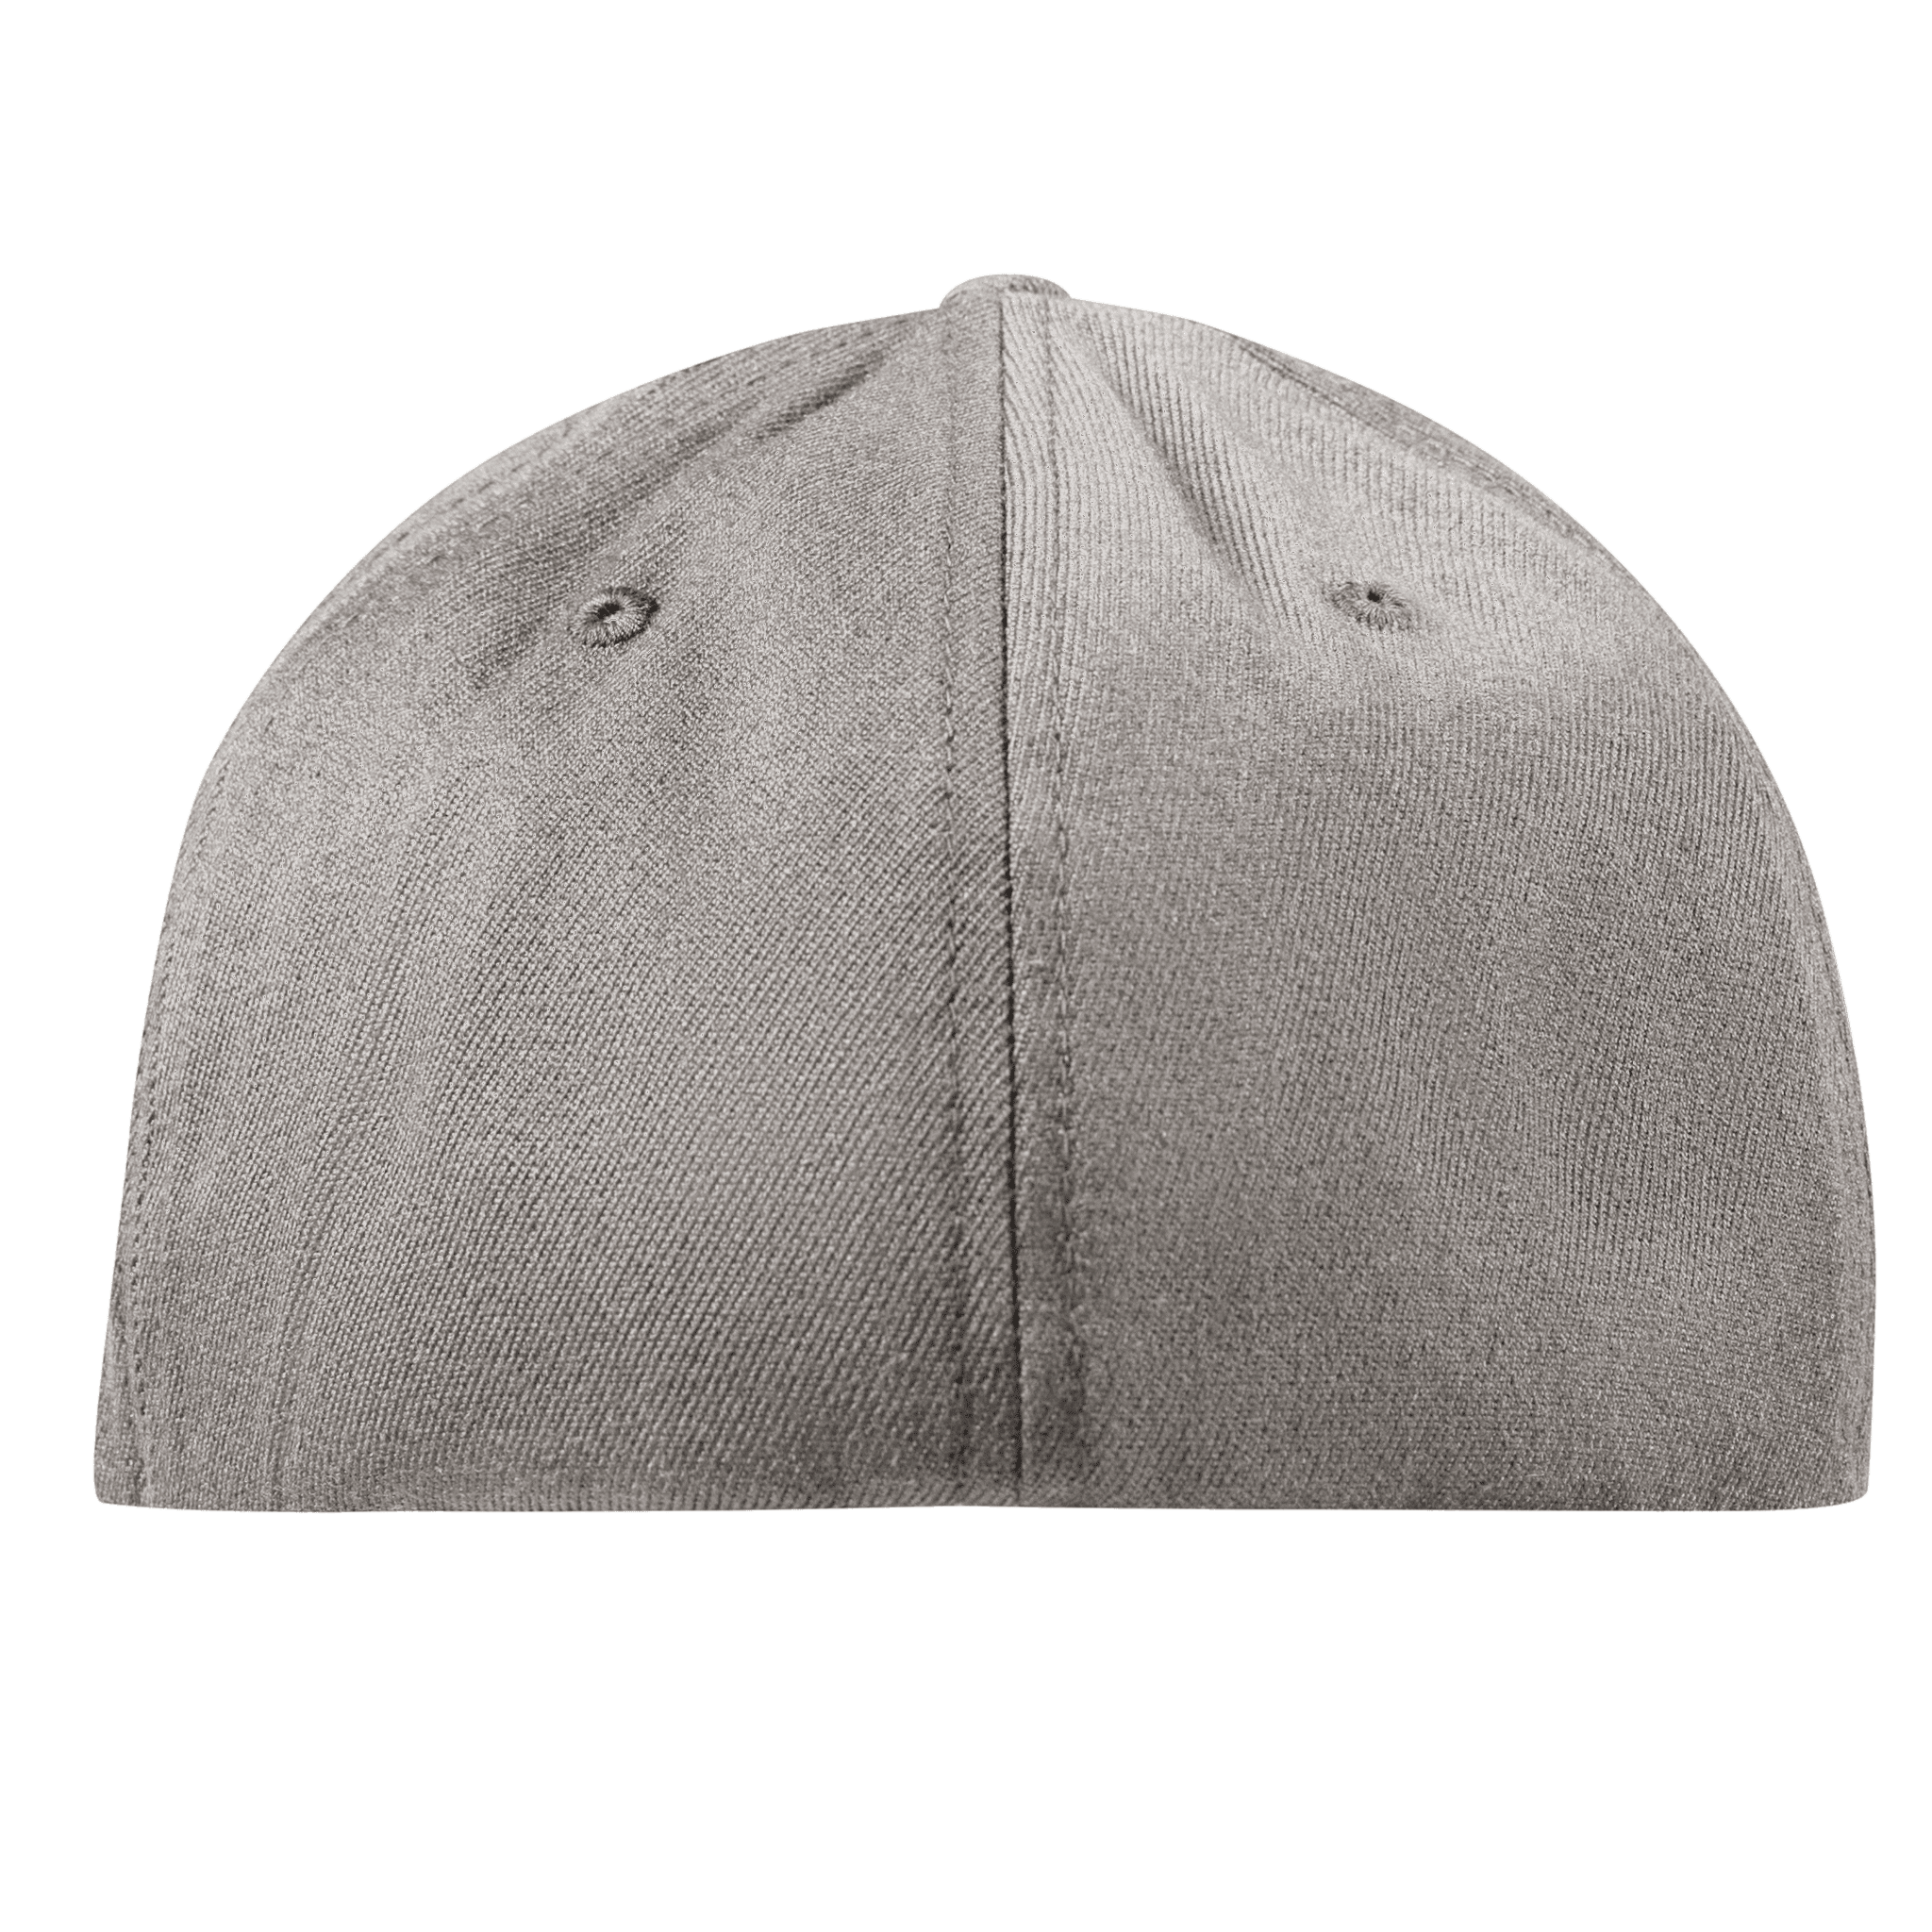 New Mexico 47 Flexfit Fitted Back Heather Grey